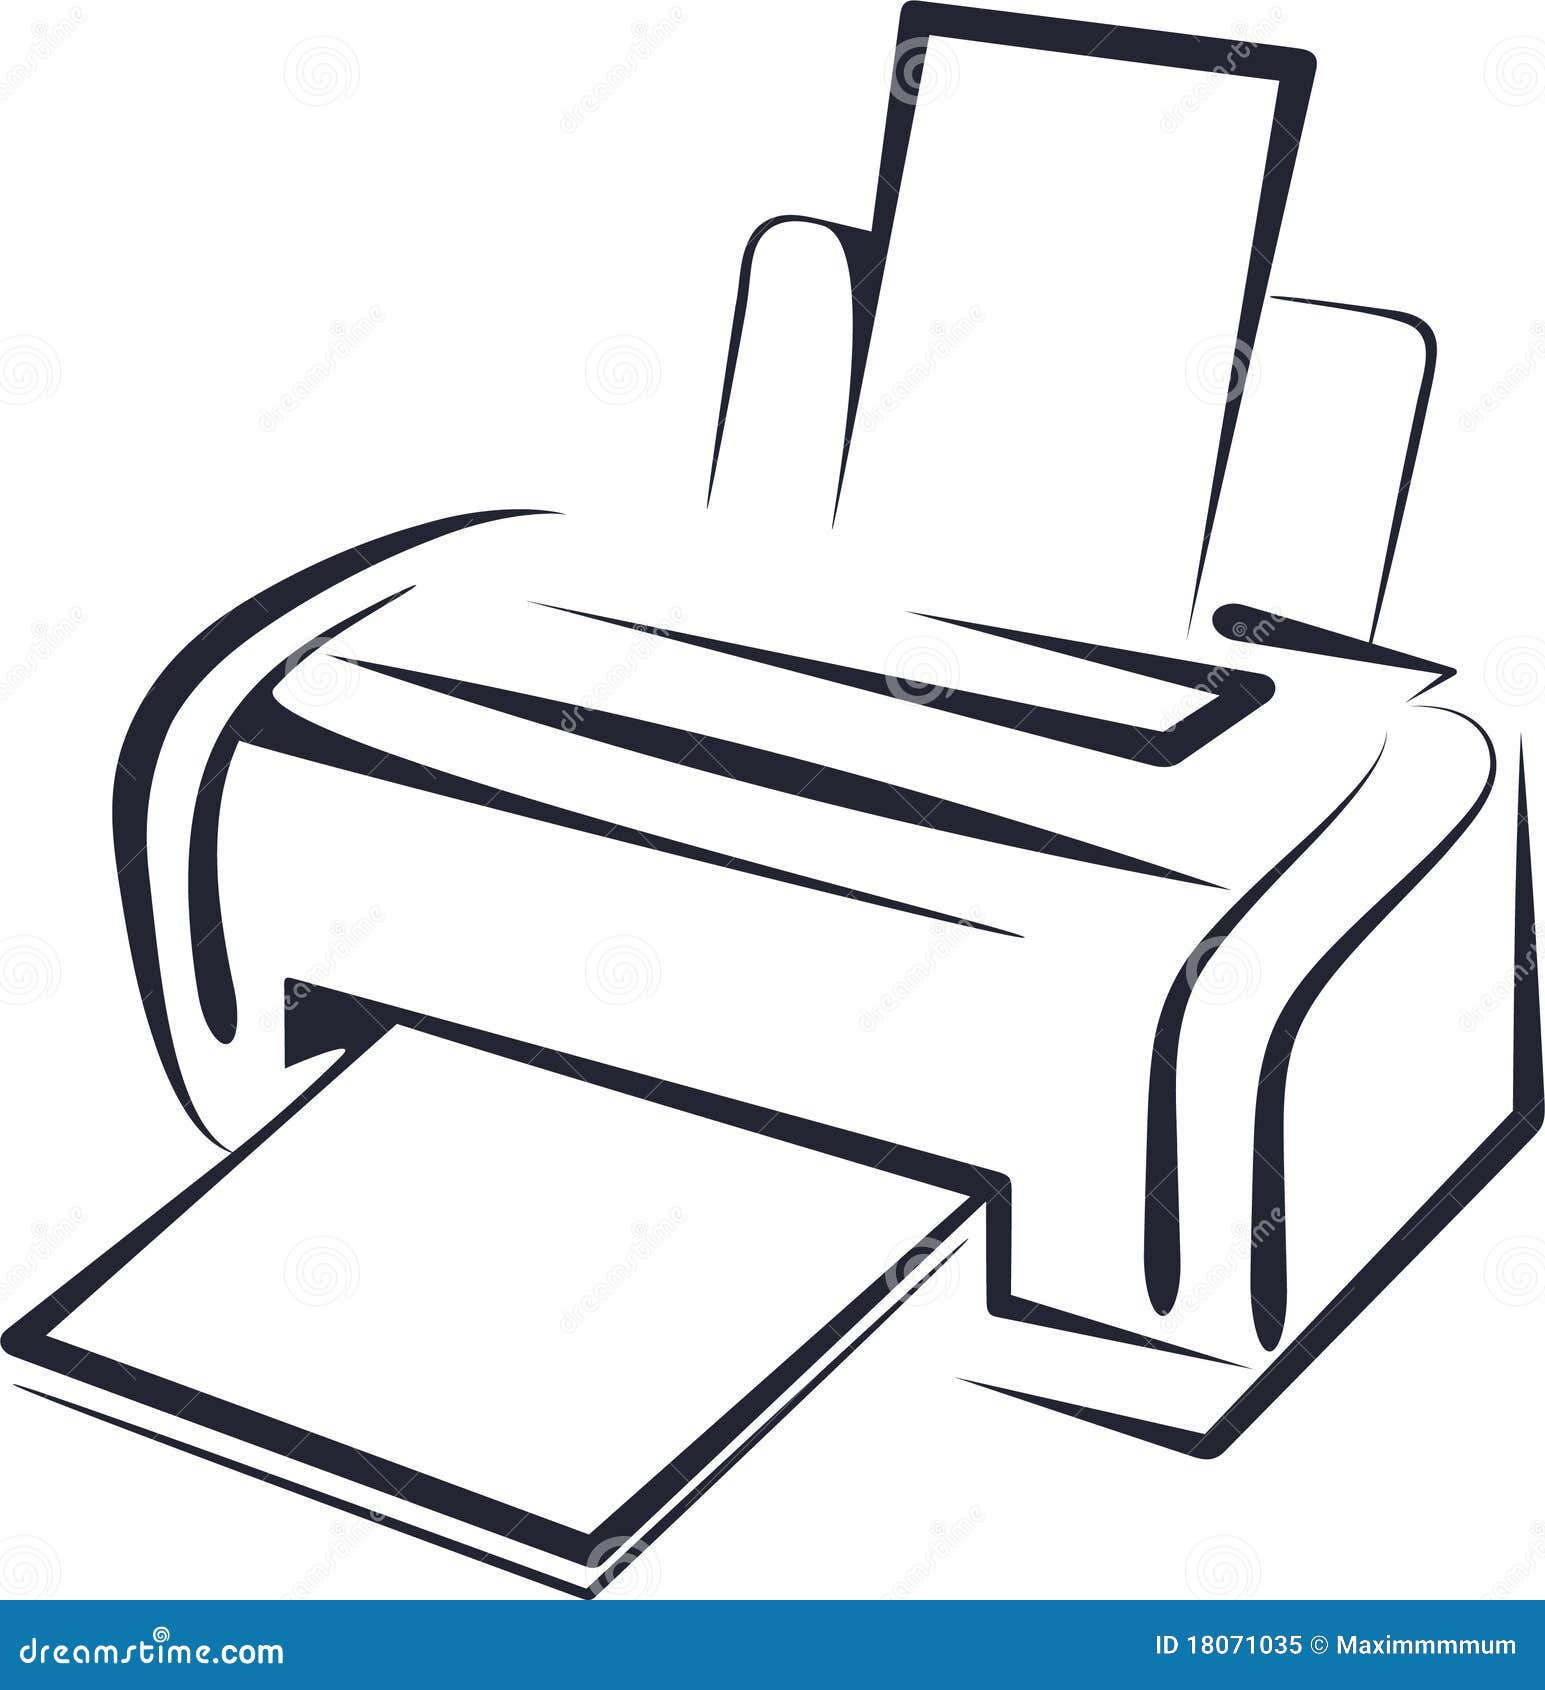 clipart printer pictures - photo #19